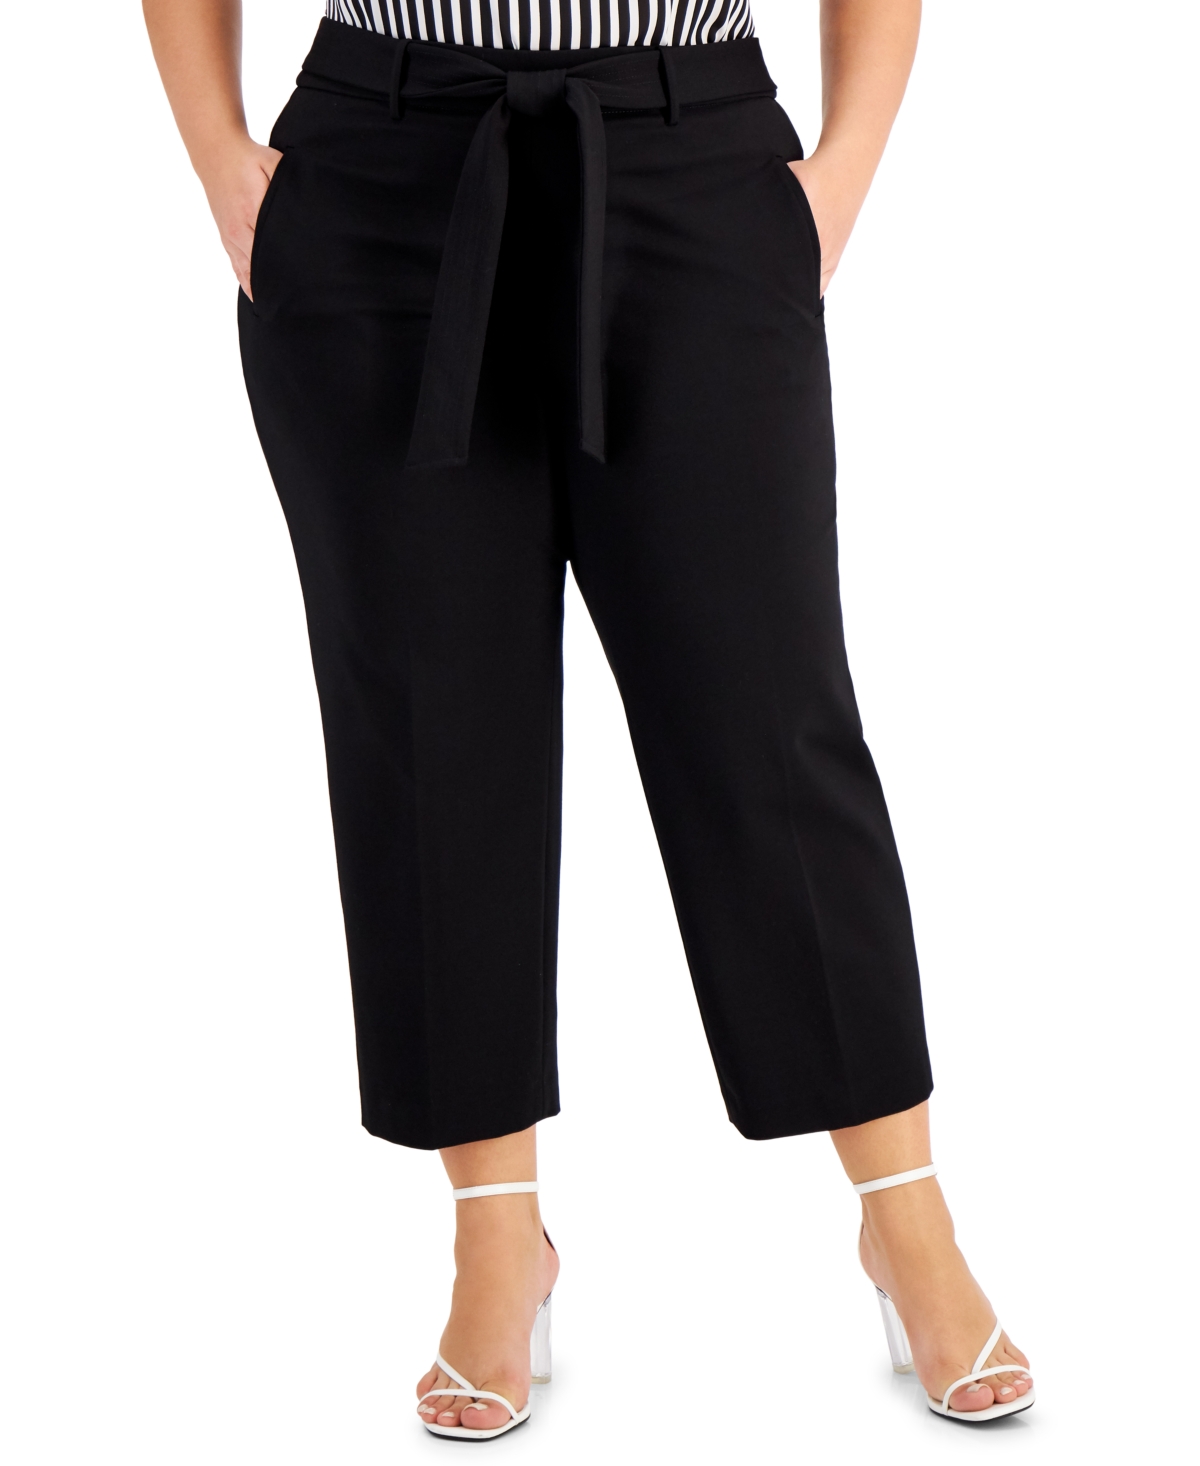  Bar Iii Plus Size Cropped Tie-Front Pants, Created for Macy's